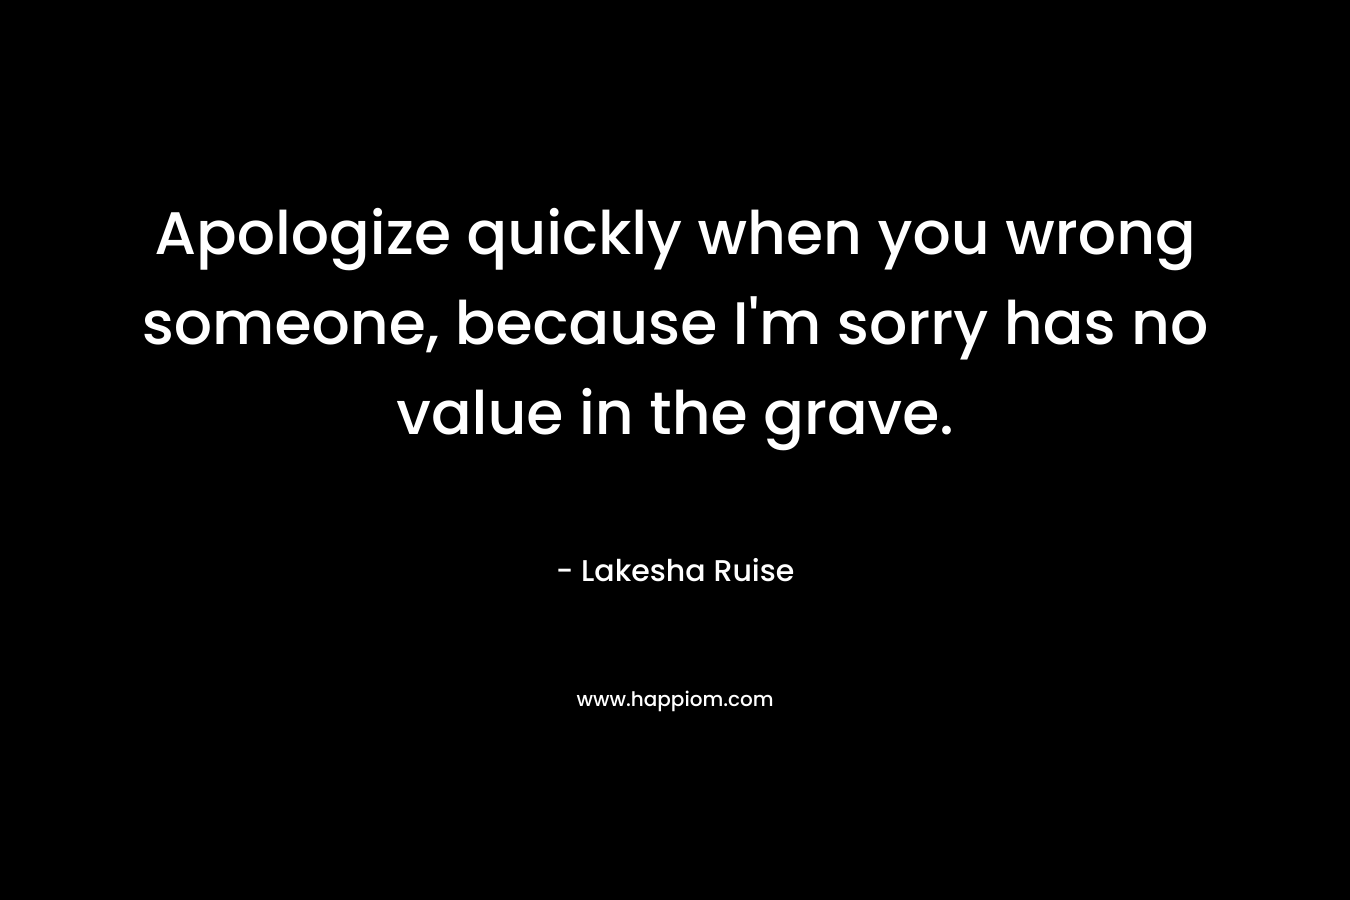 Apologize quickly when you wrong someone, because I’m sorry has no value in the grave. – Lakesha Ruise